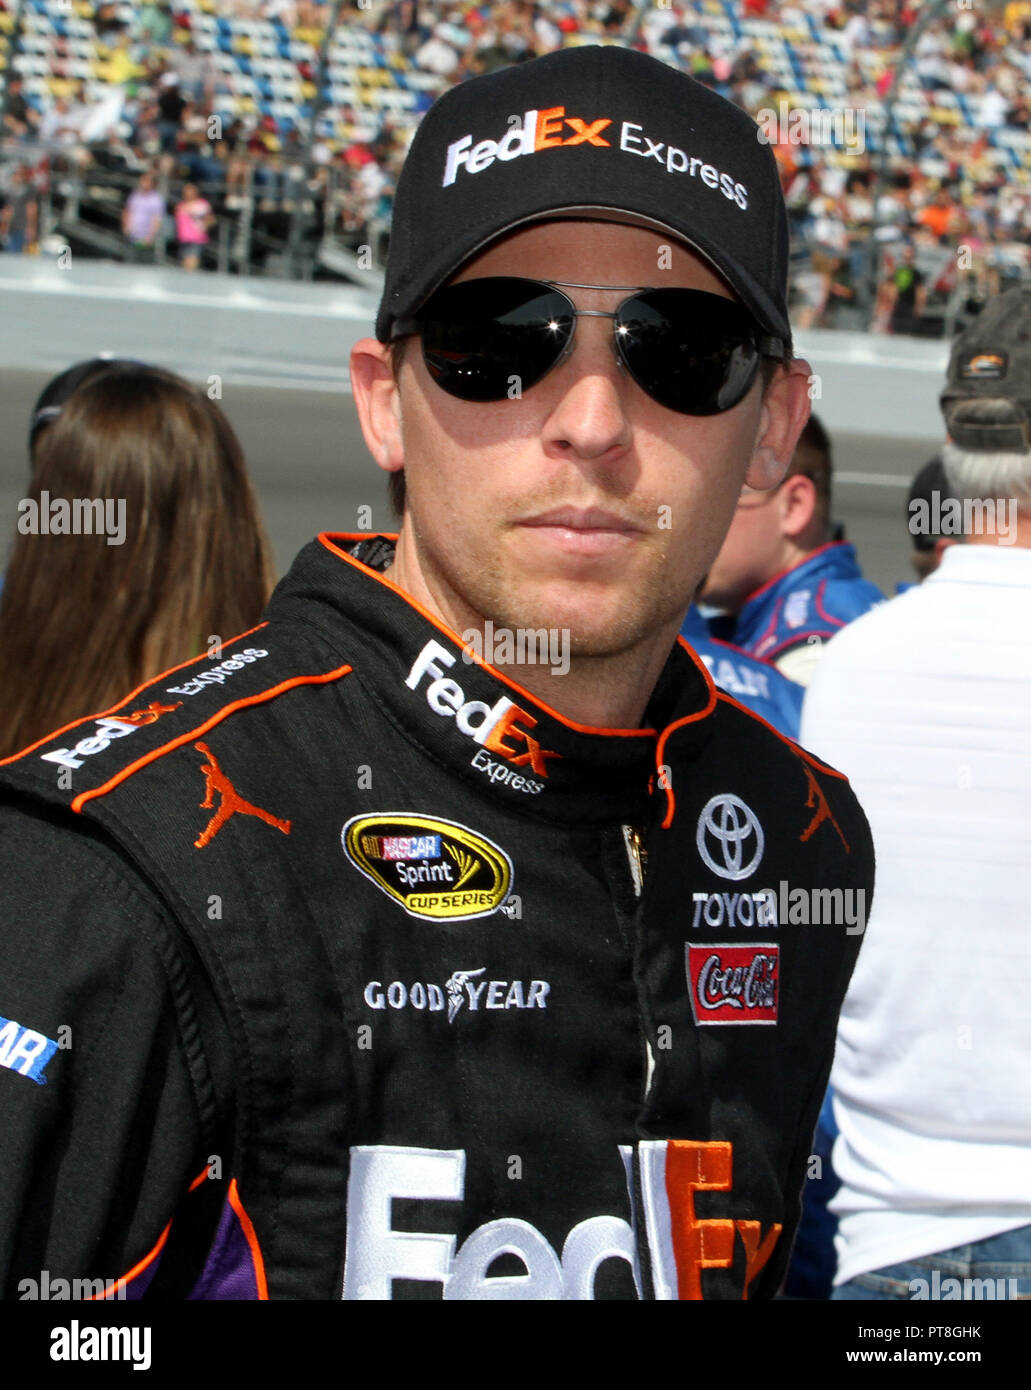 Denny Hamlin waits on pit road for the start of the NASCAR Sprint Cup Budweiser Duel #1, at Daytona International Speedway in Daytona, Florida on February 21, 2013. Stock Photo